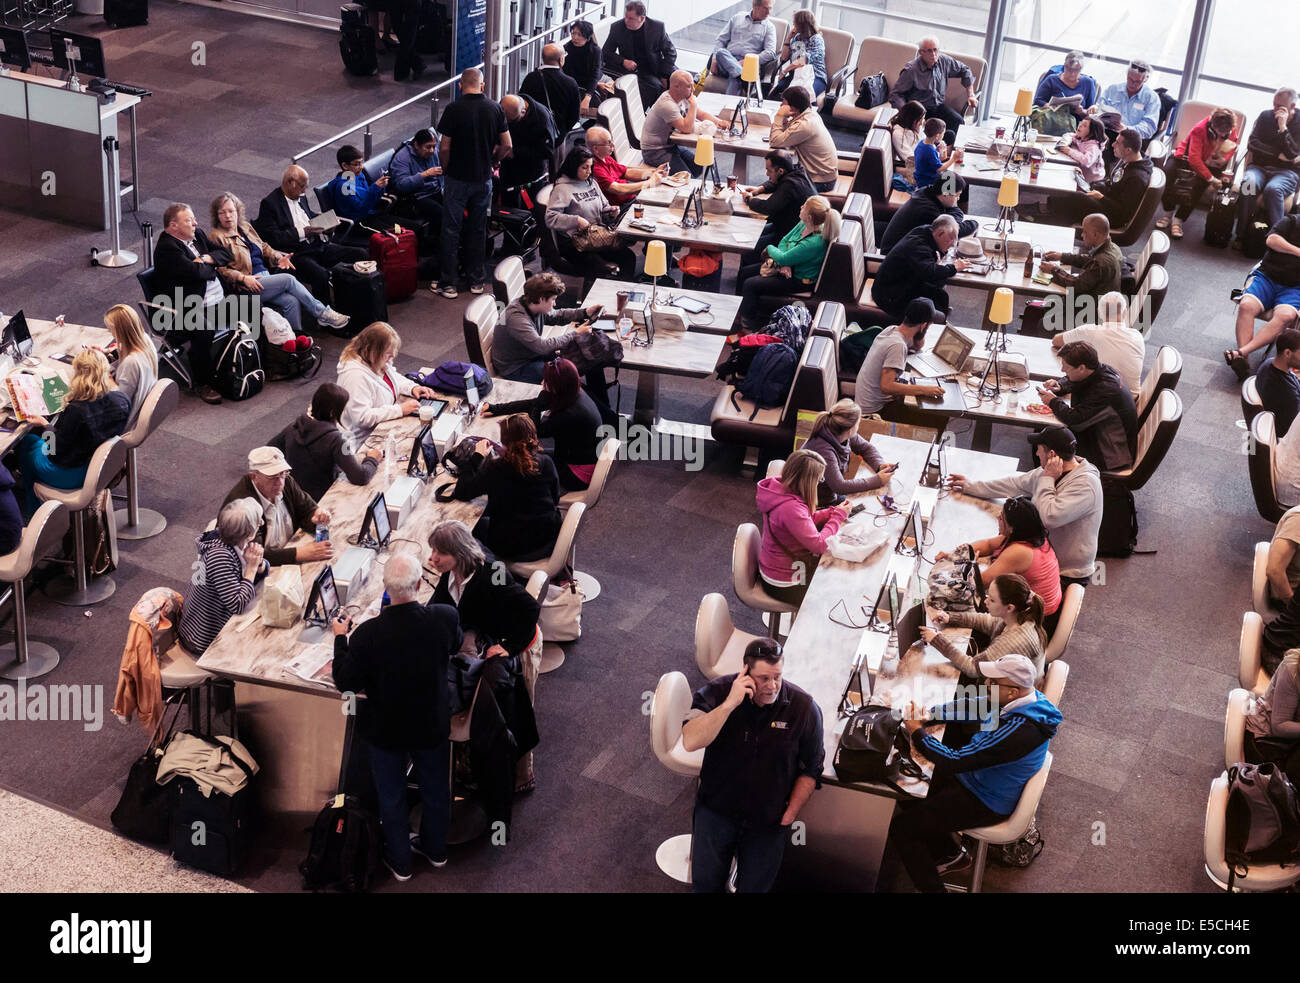 People waiting for their flight at Toronto Pearson International airport, Canada 2014 Stock Photo